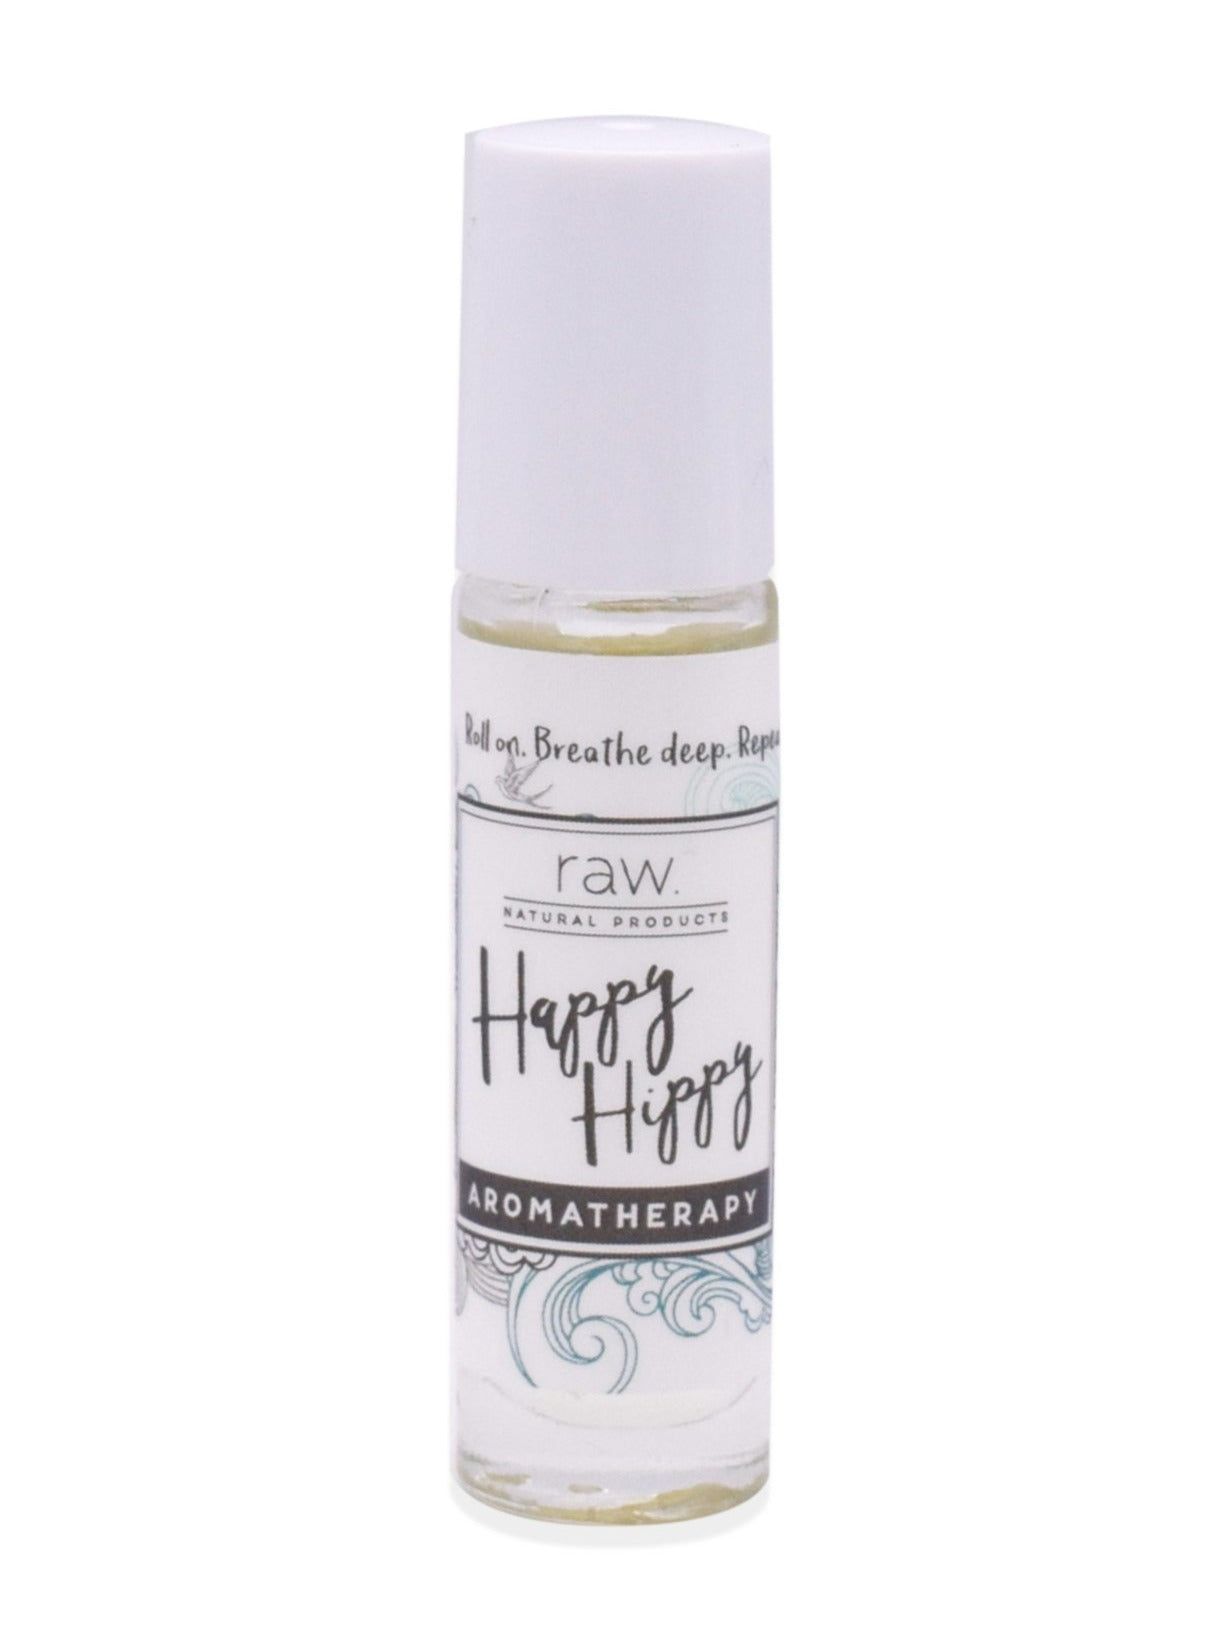 Happy Hippy Aromatherapy Roll On Perfume - FINAL SALE Home & Lifestyle Happy Hippy